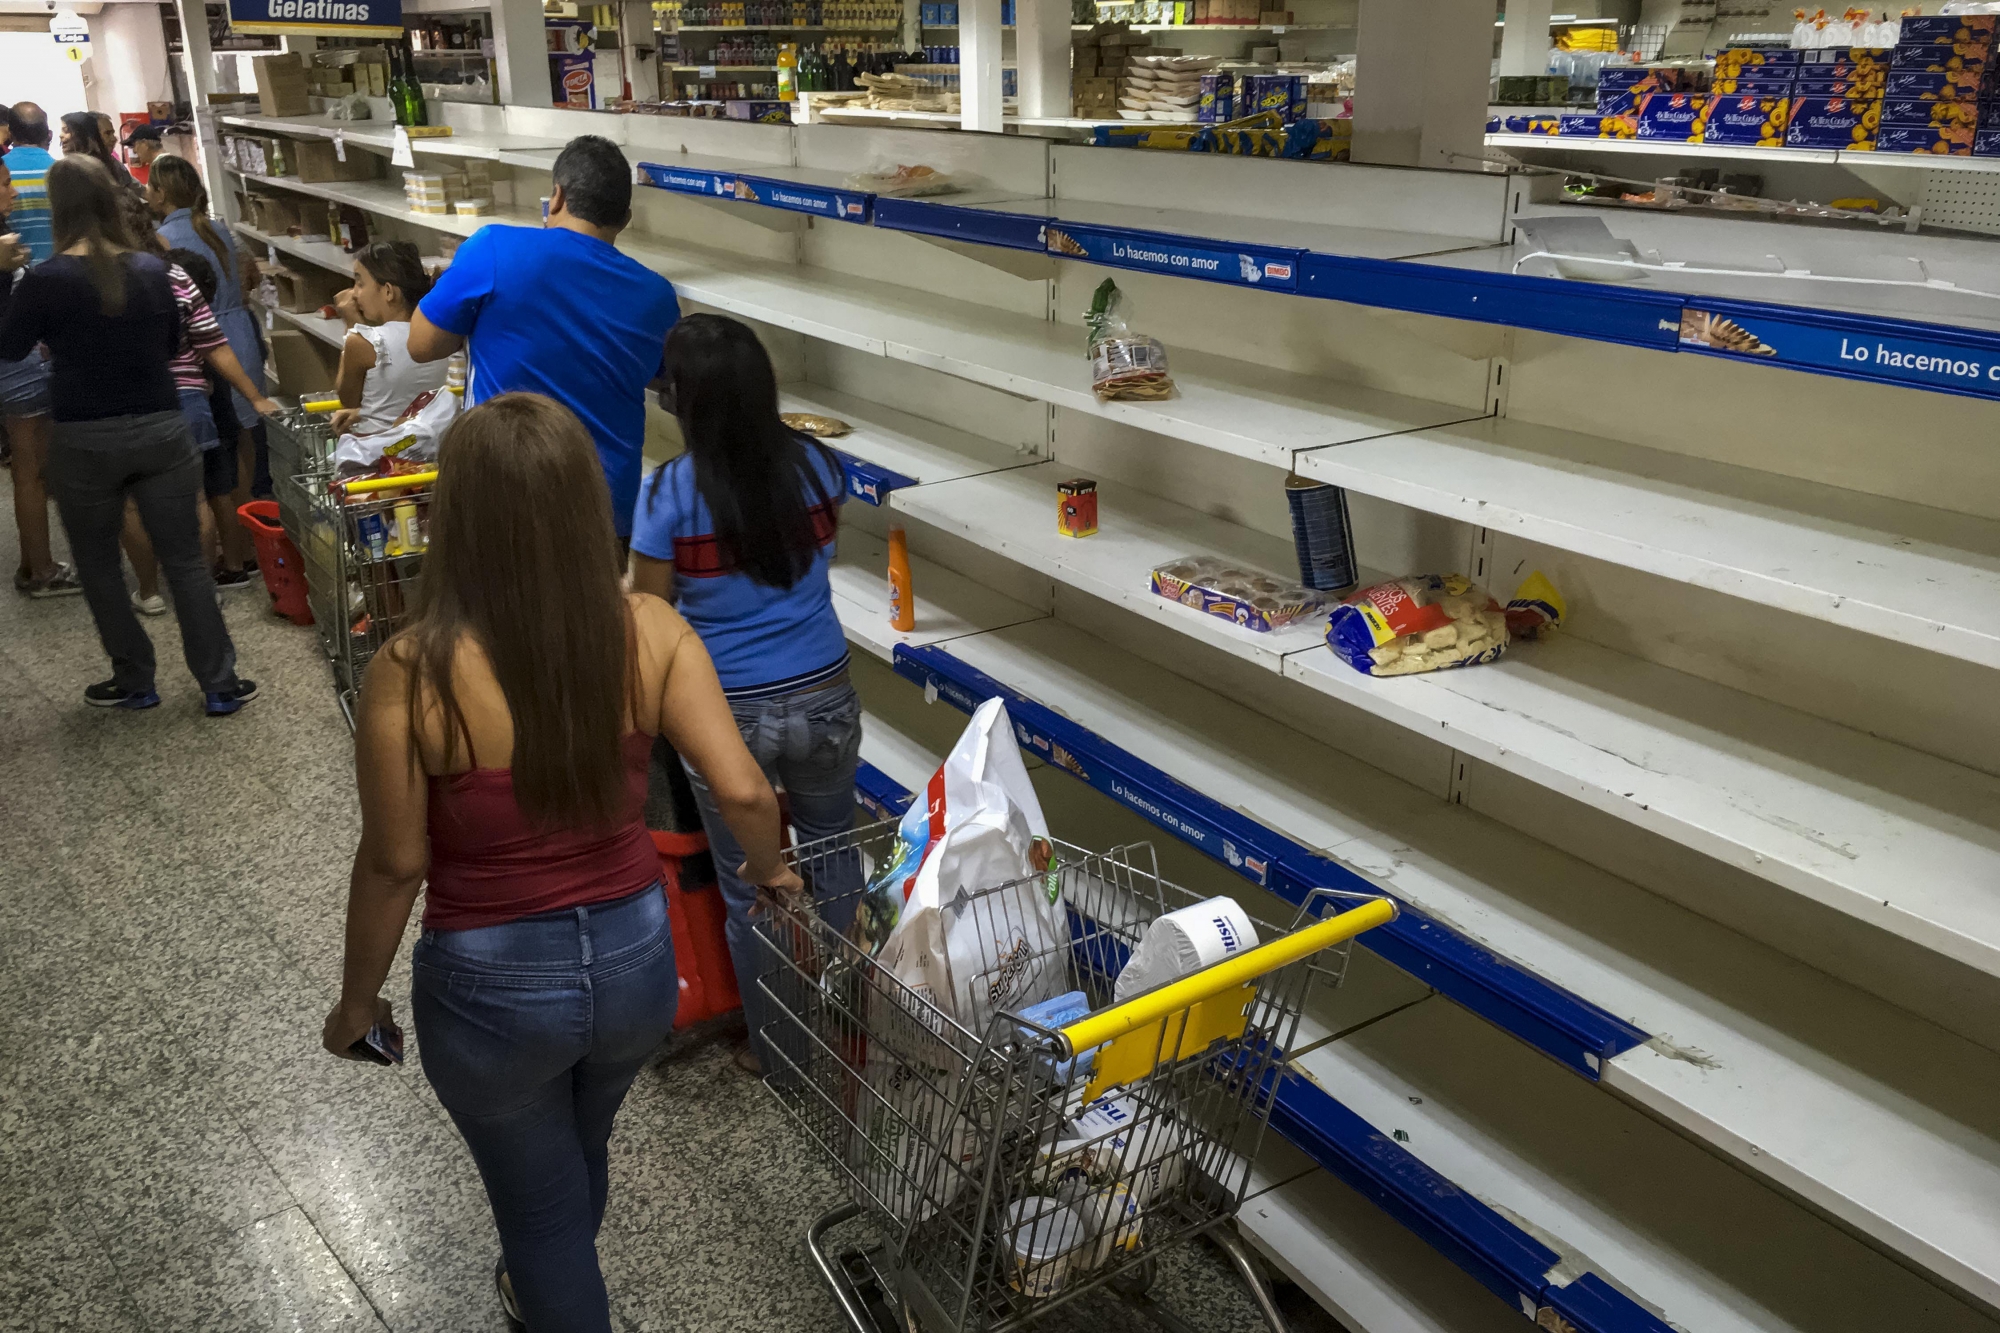 epa06107779 A view of nearly empty supermarket shelves in Caracas, Venezuela, 24 July 2017. Venezuelans are stocking up on food, gas and basic goods as the city prepares for general strike organized by opponents to President Nicolas Maduroís government.  EPA/MIGUEL GUTIERREZ VENEZUELA CRISIS